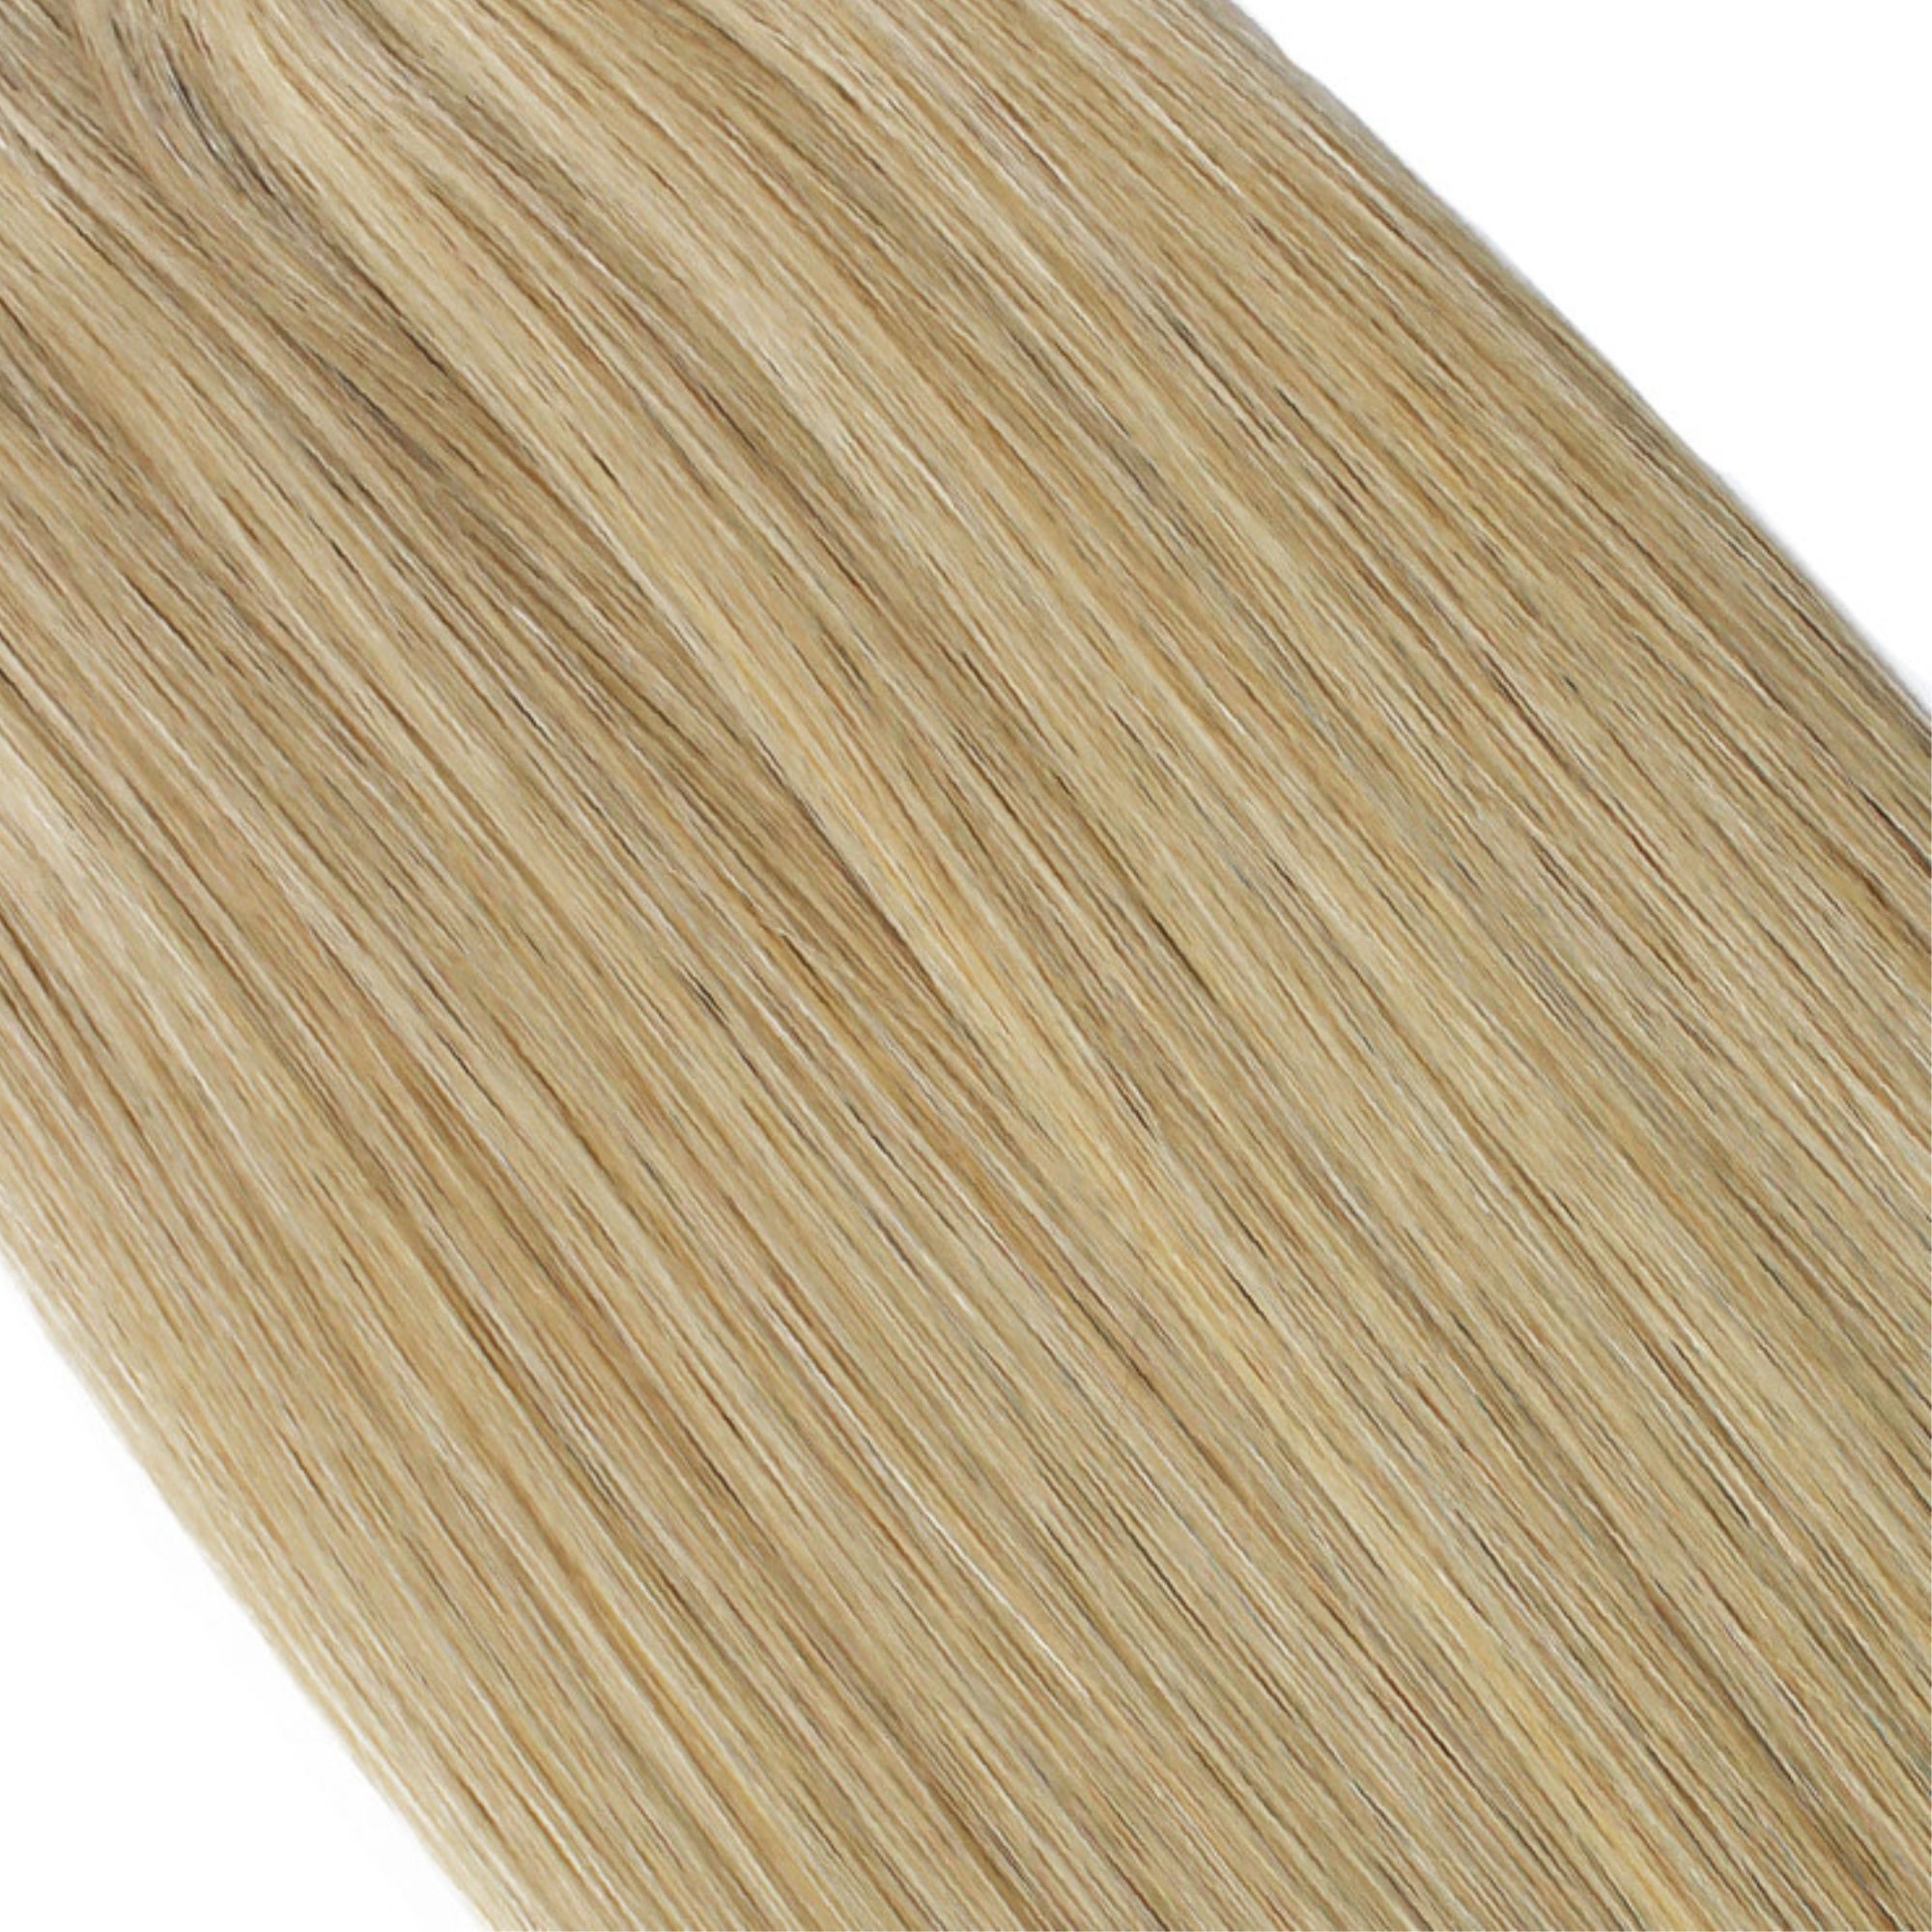 "hair rehab london 22" weft hair extensions shade swatch titled dirty blonde"